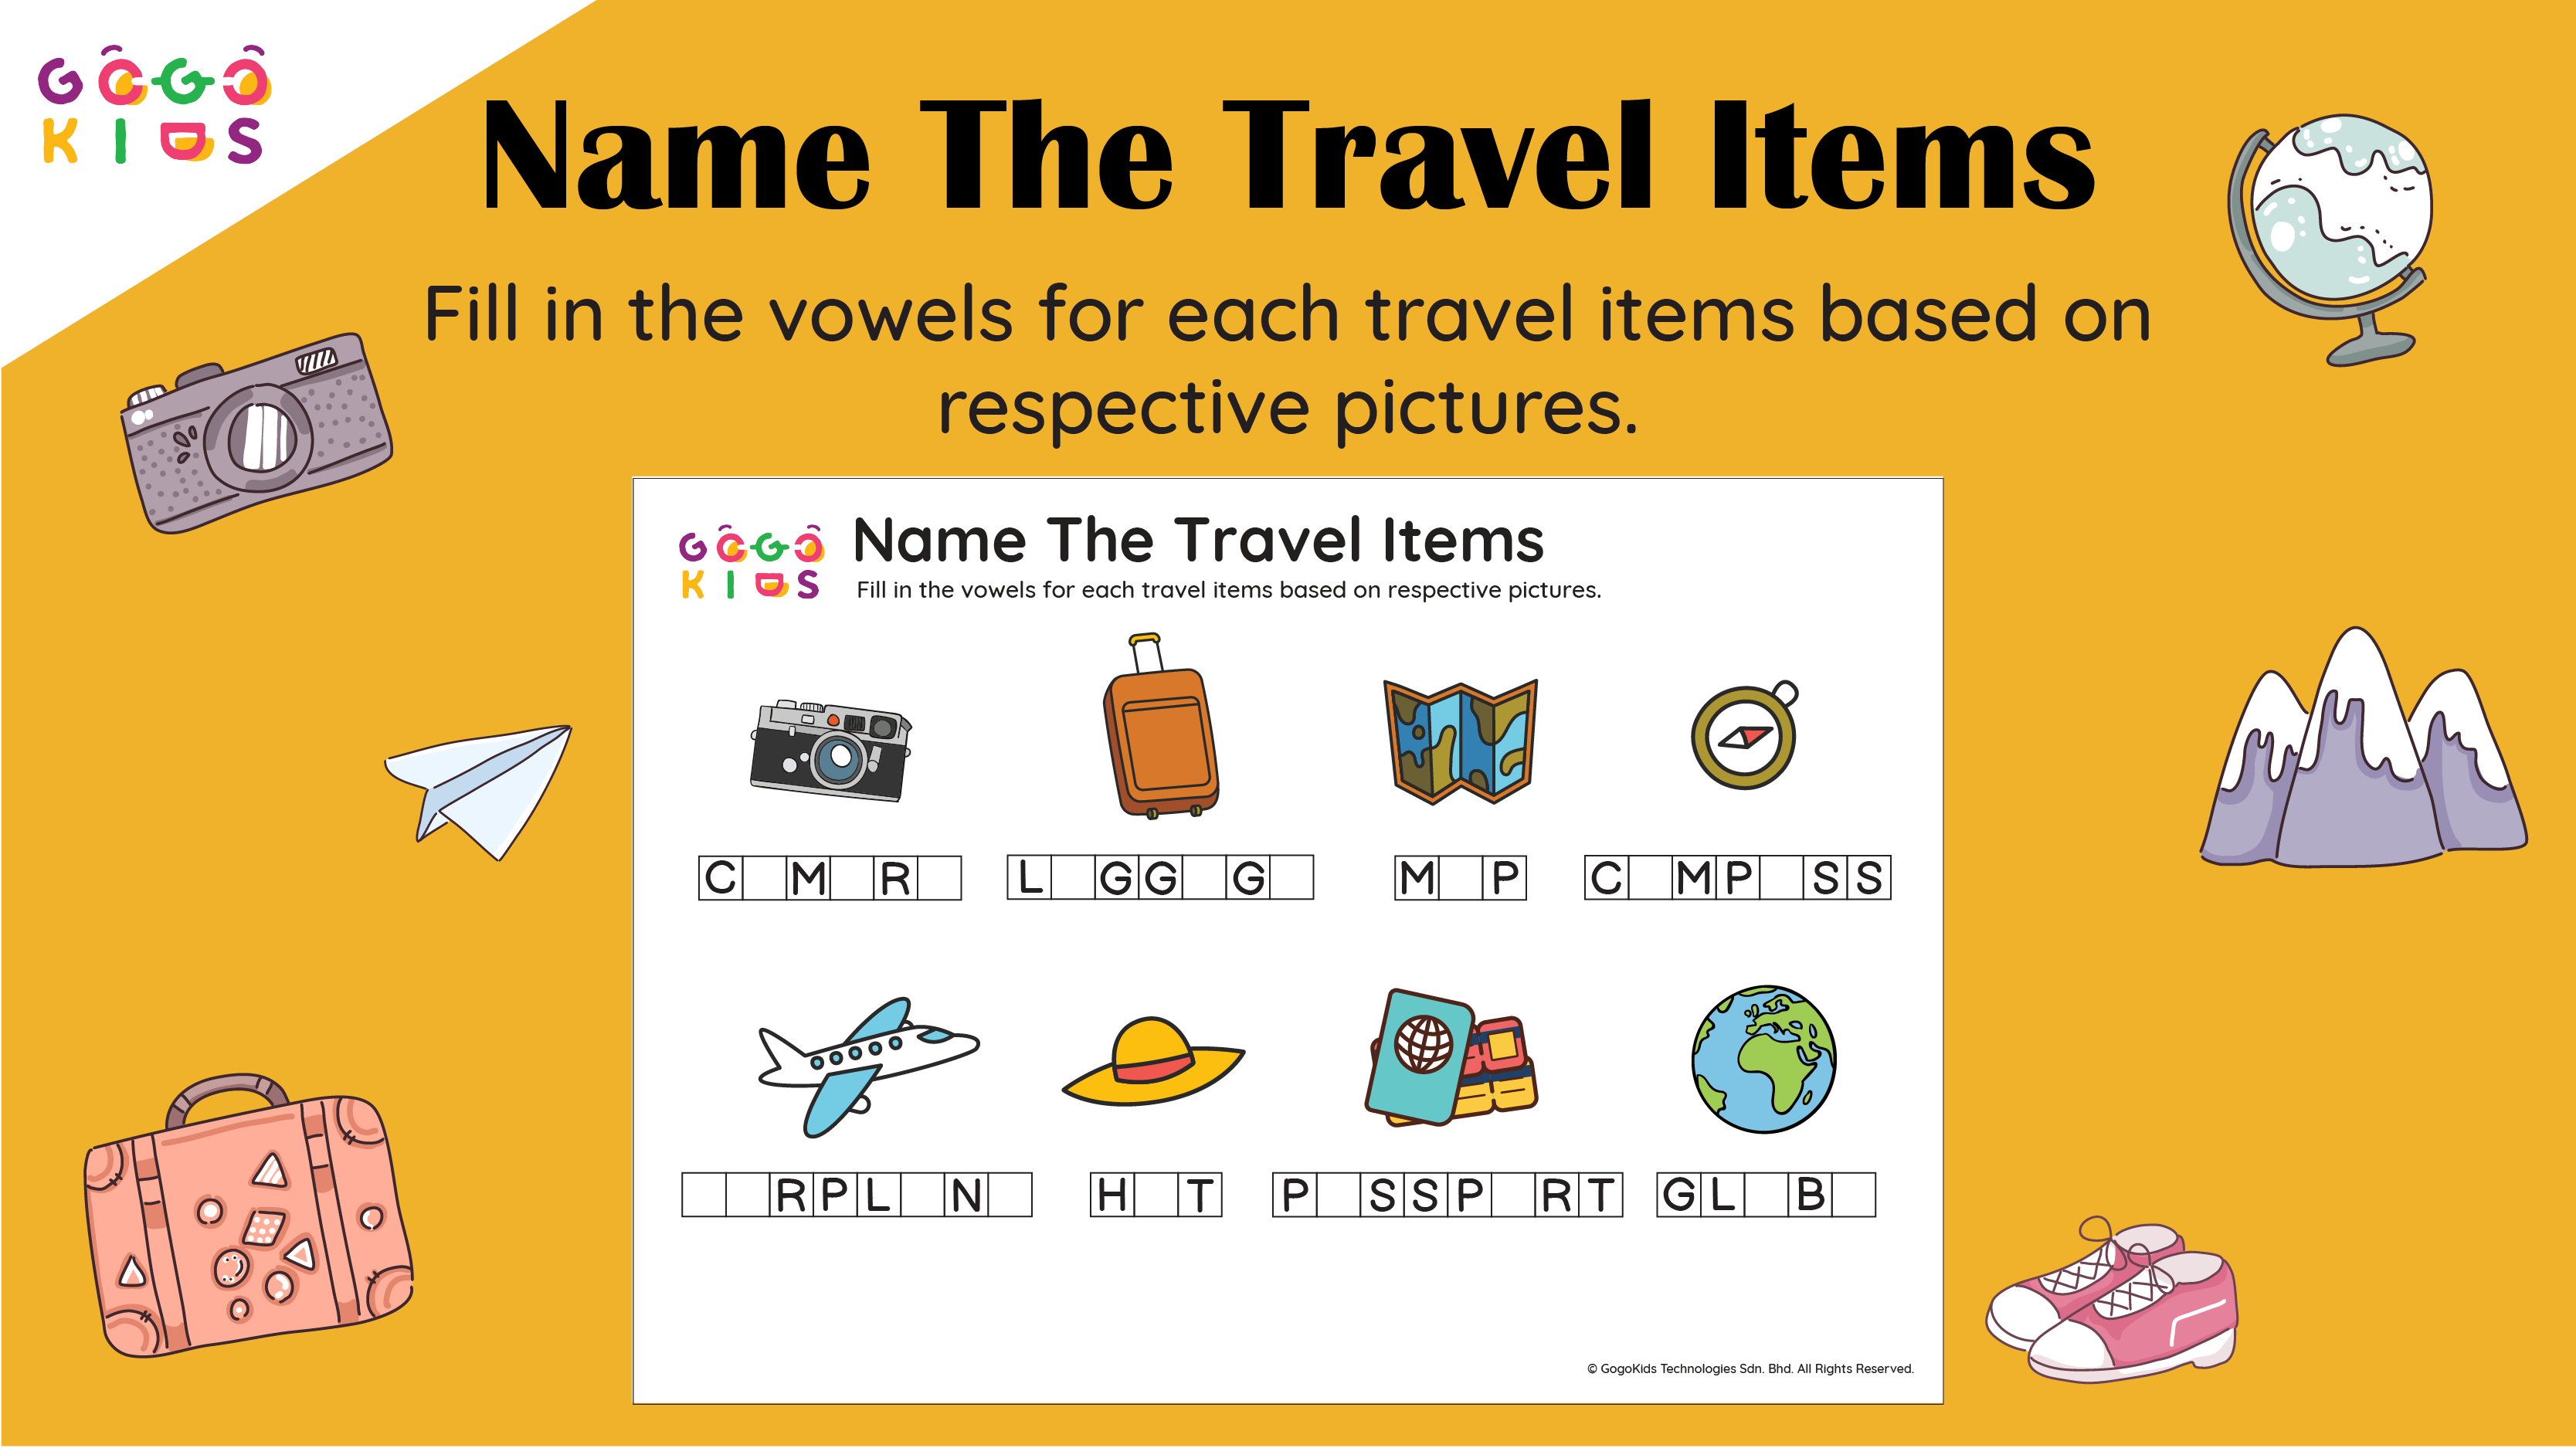 Words and Numbers: Name The Travel Items